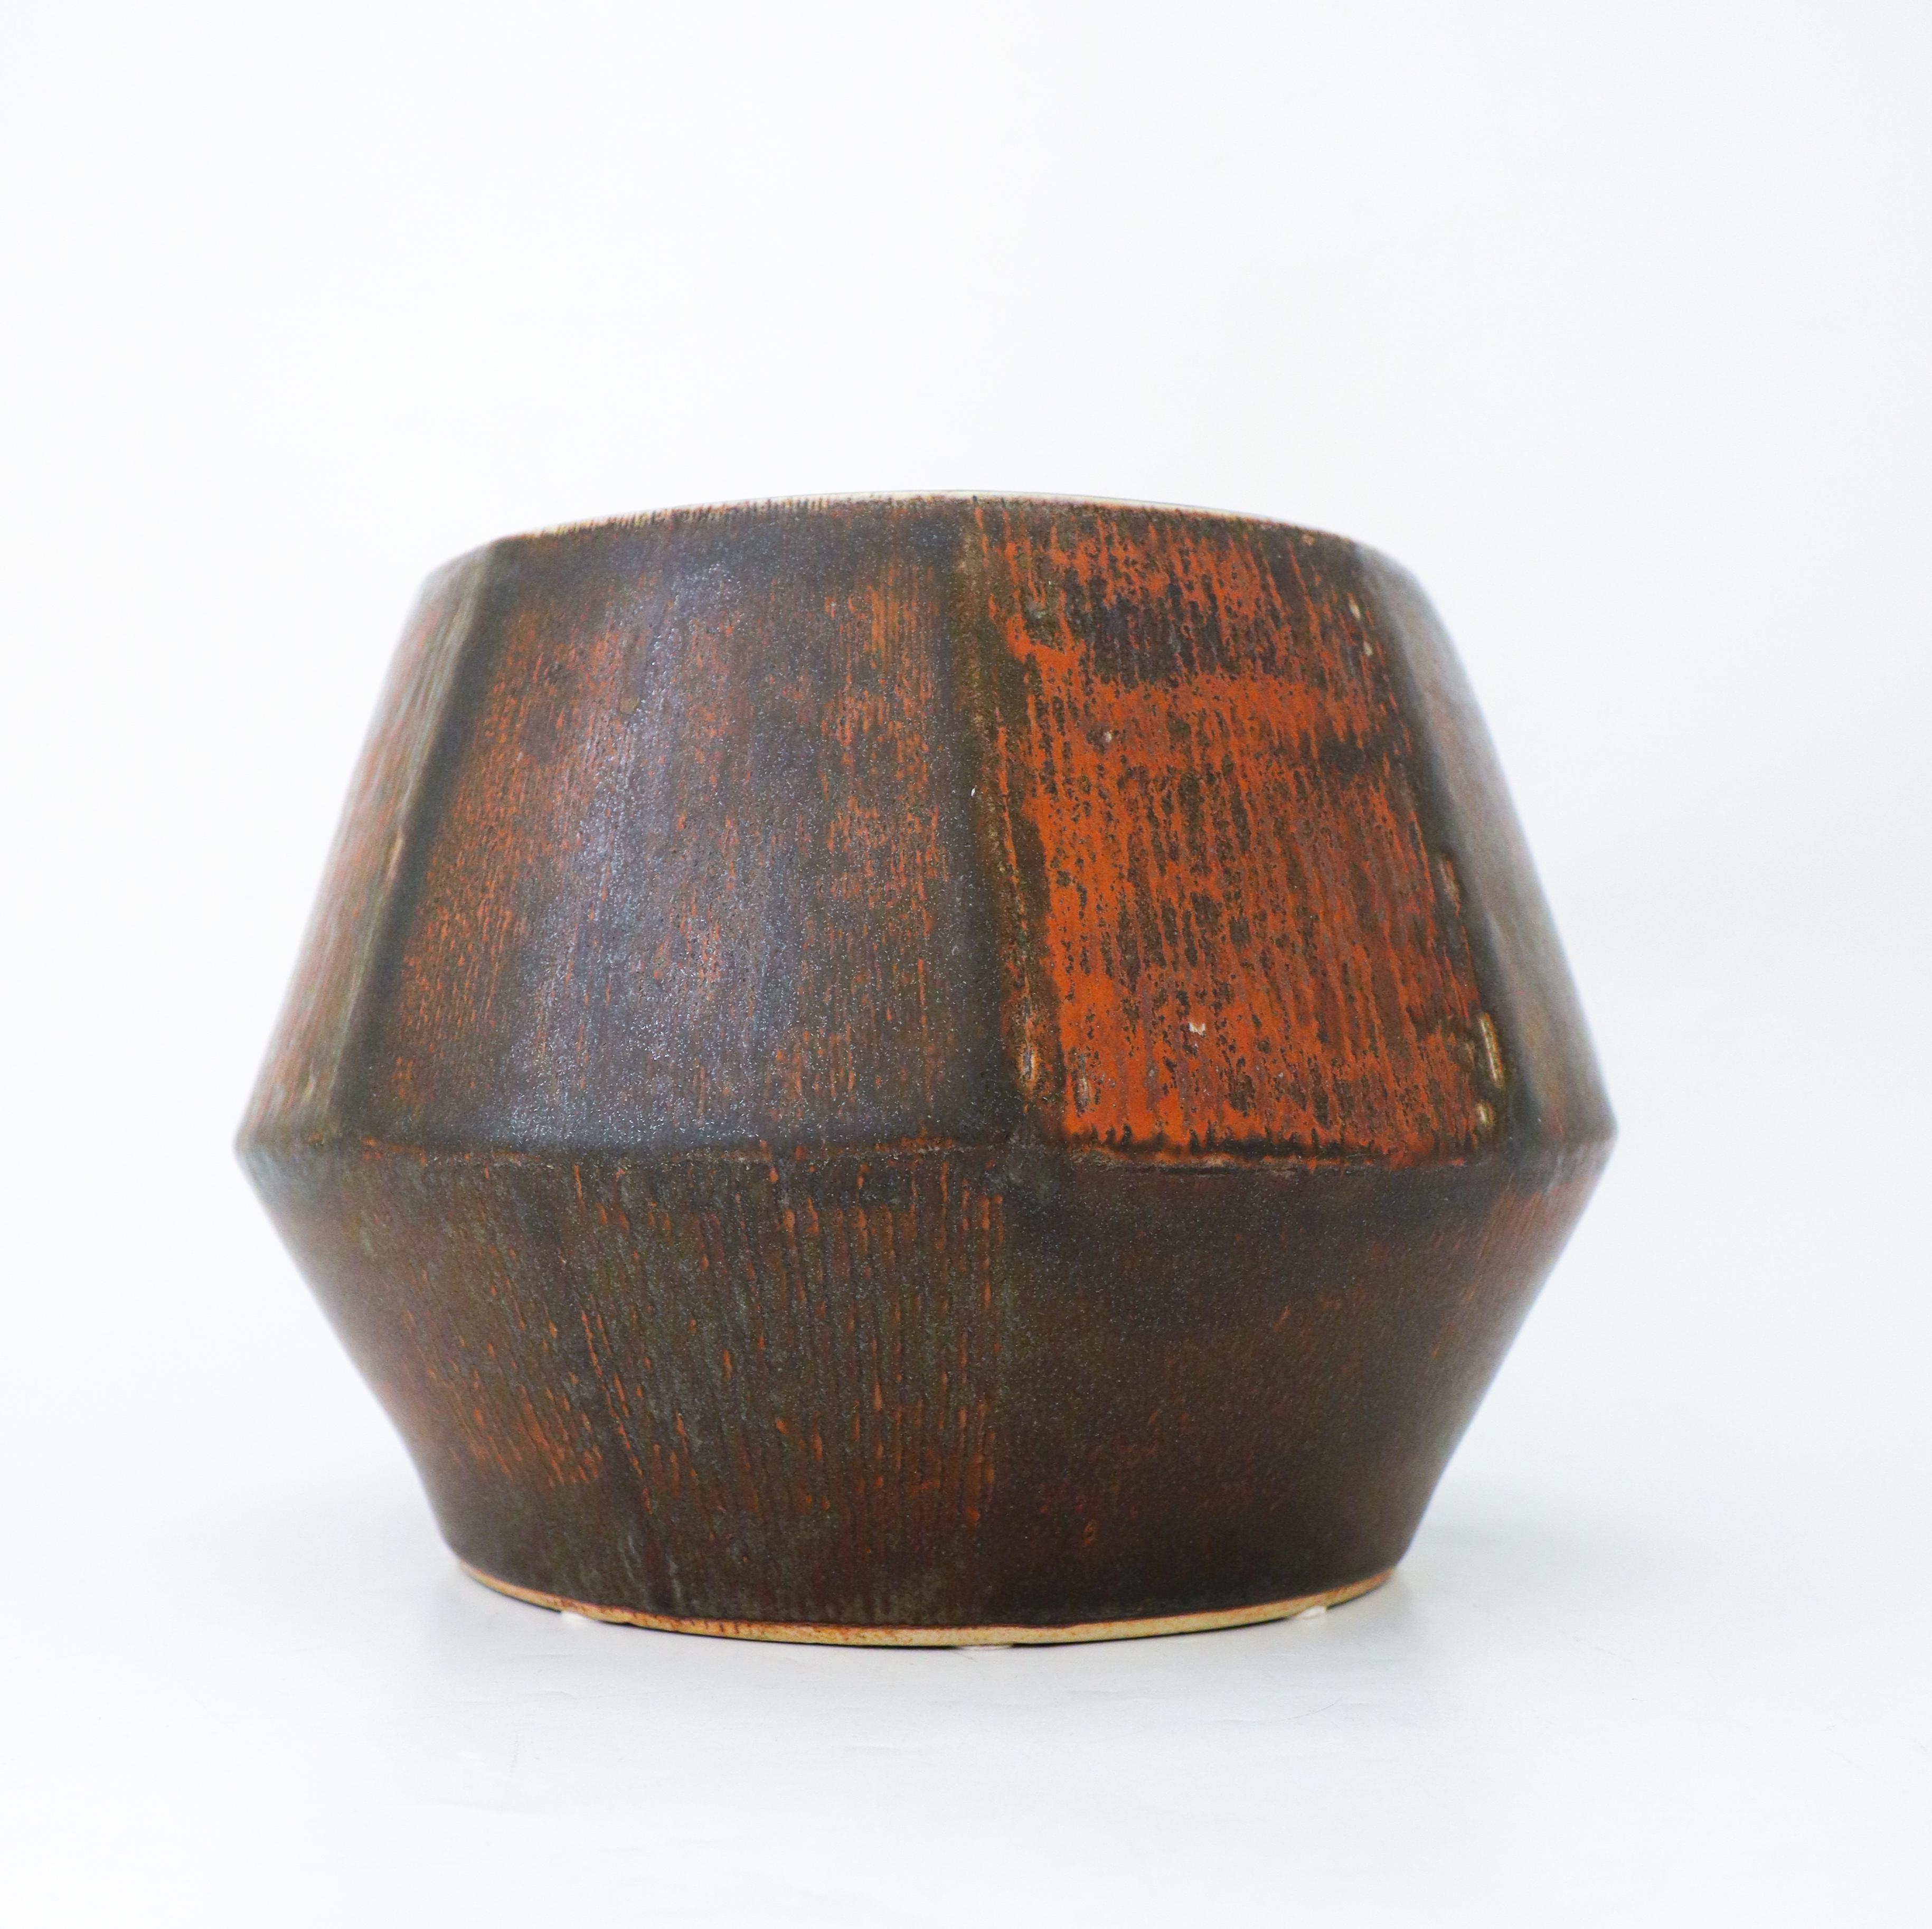 A large unique brown flower pot or bowl designed by Carl-Harry Stålhane at Rörstrand, it is 27,5 cm (11